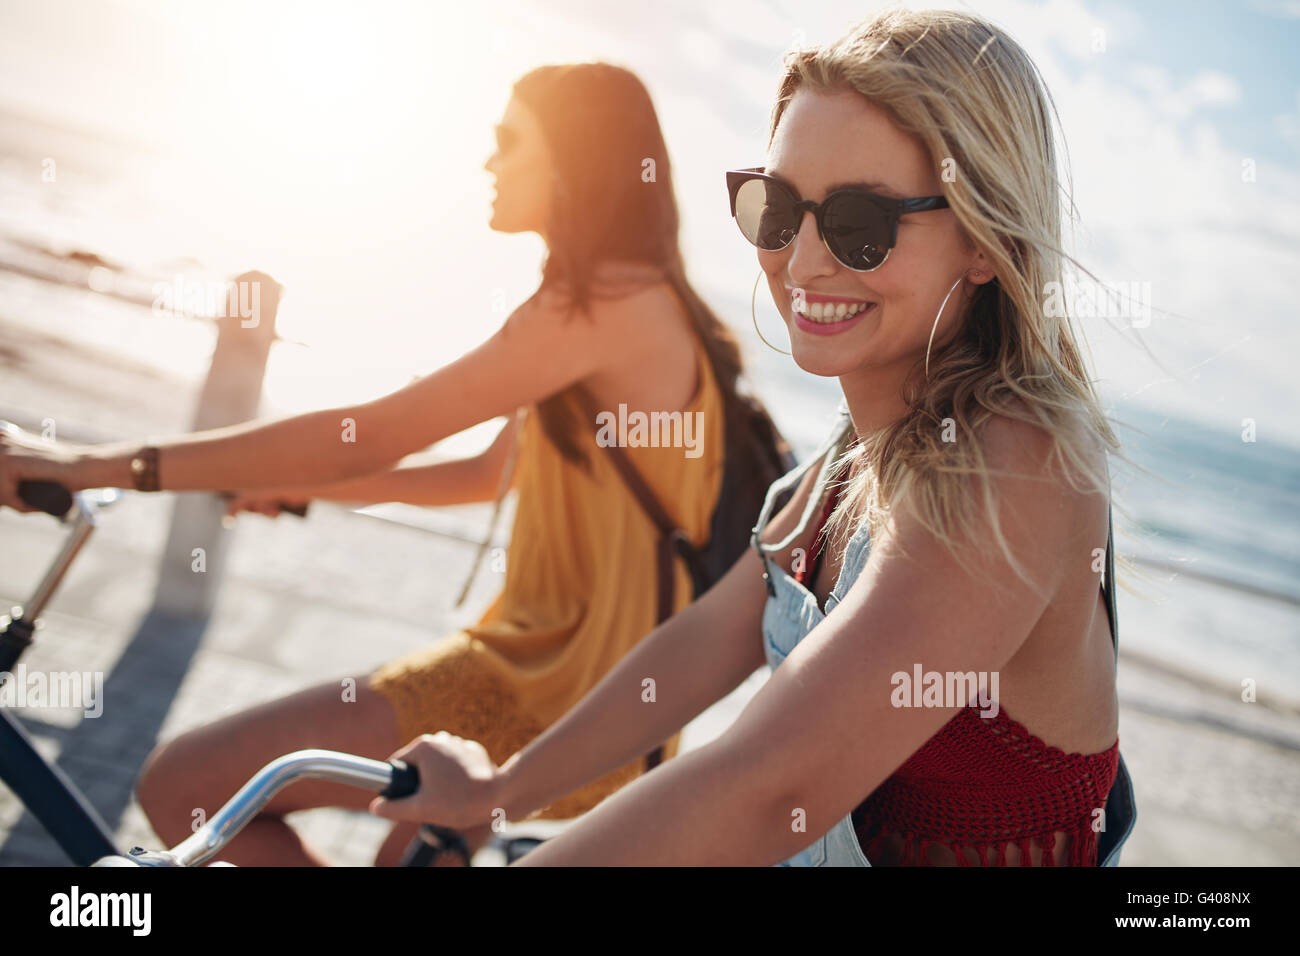 Smiling young woman riding bicycle with her friend on a sunny day. Two female friends cycling on a seaside promenade. Stock Photo